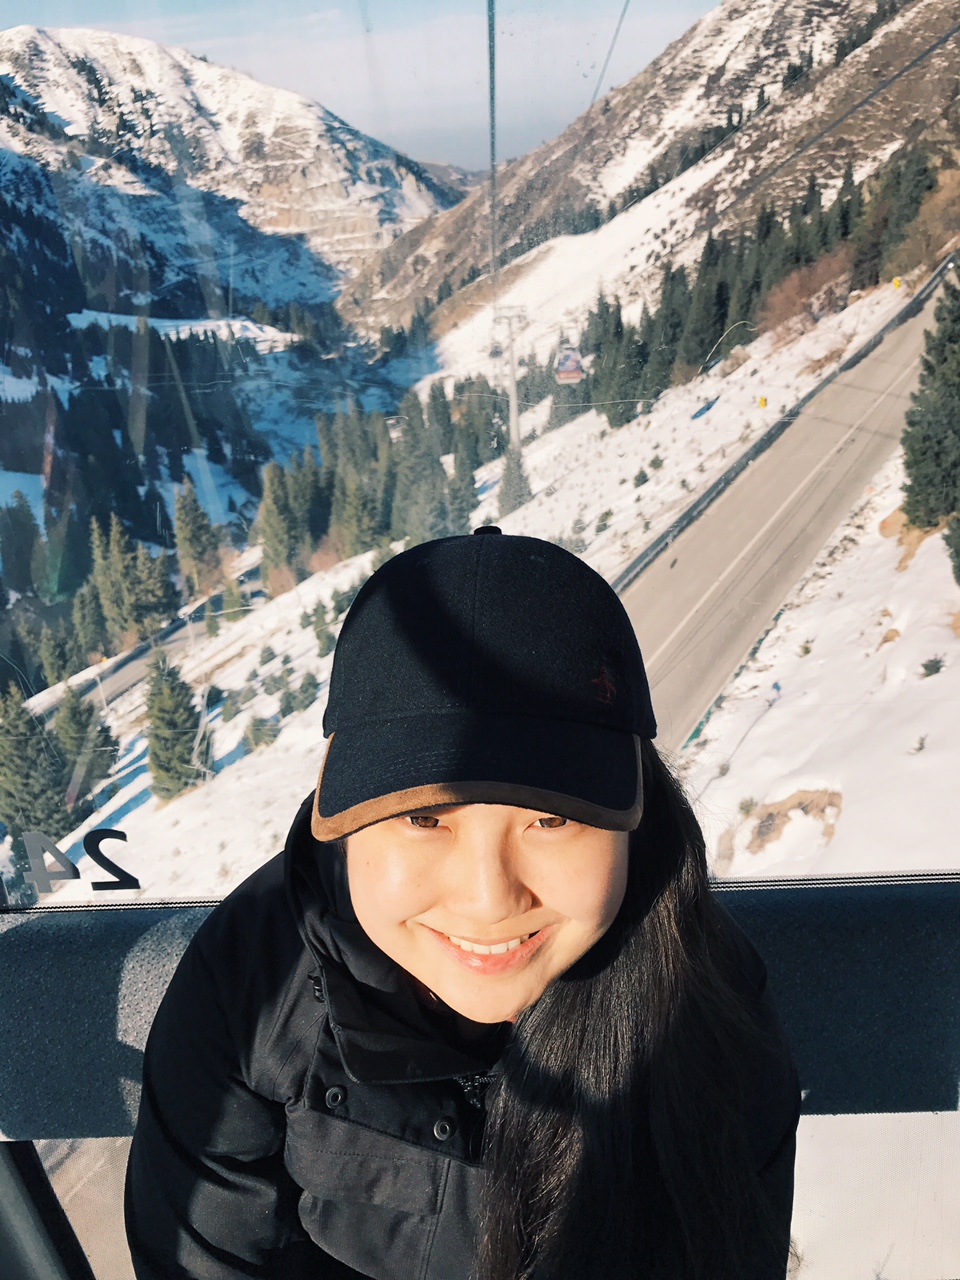 hj in the mountains